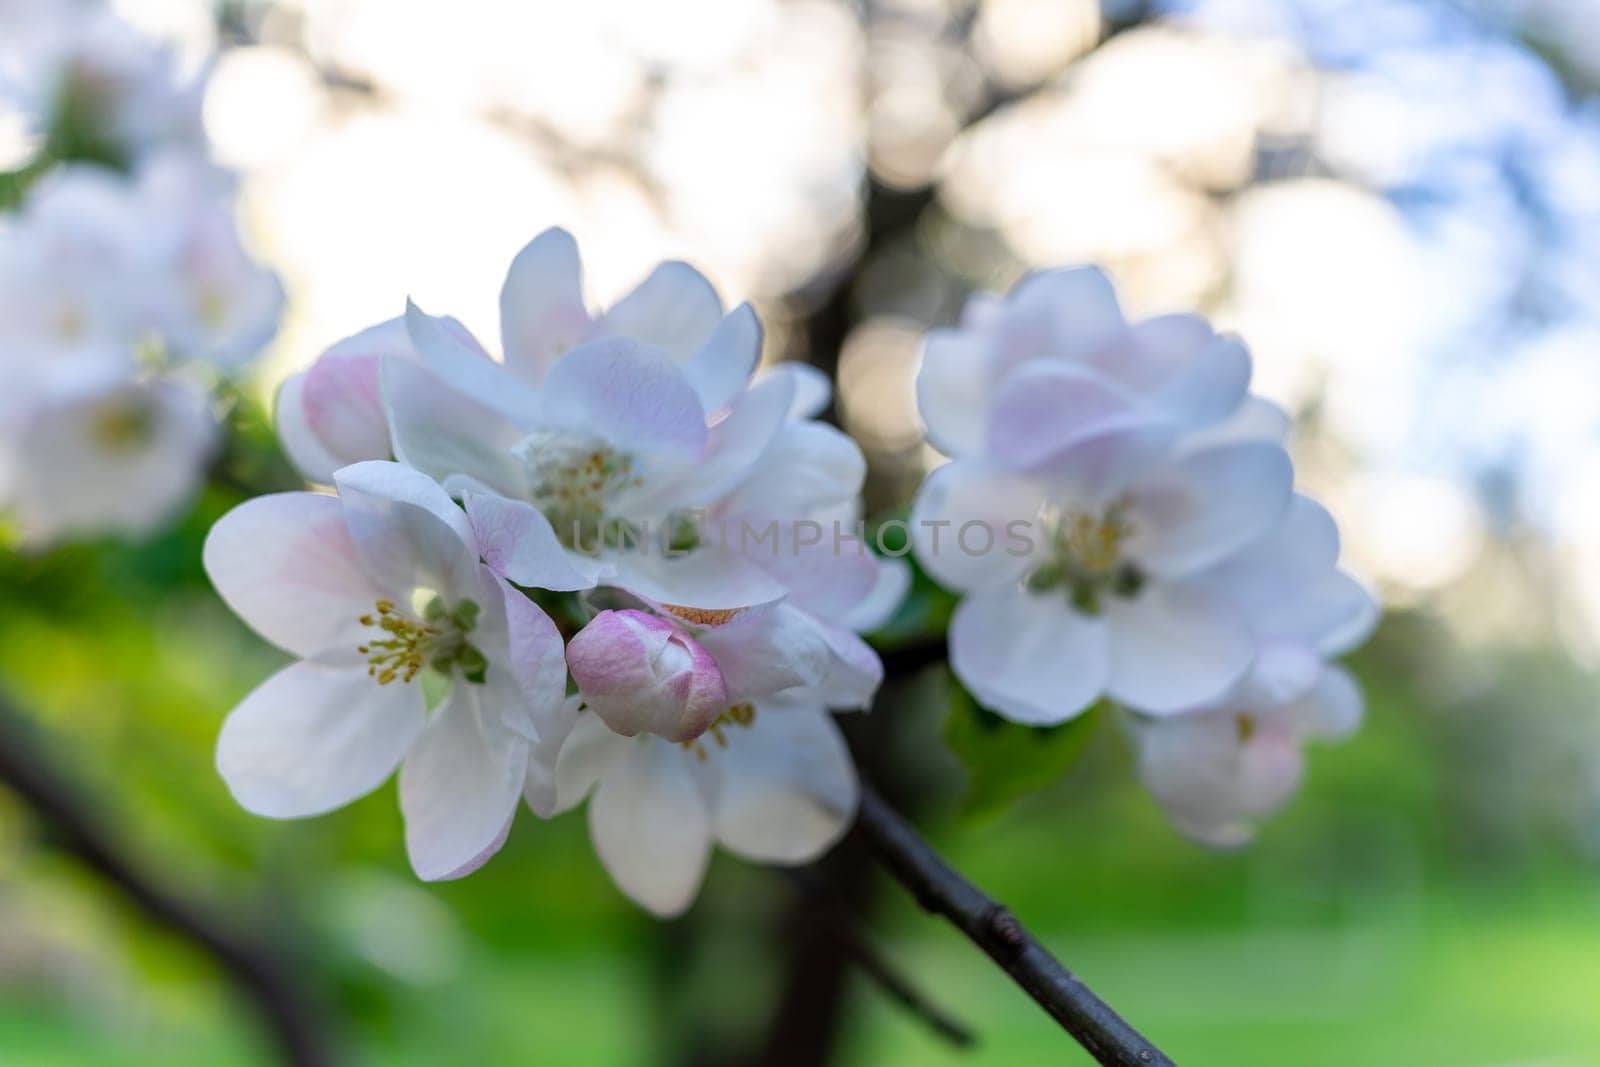 White-purple apple blossom. Several flowers of an apple tree on a blurred background of nature